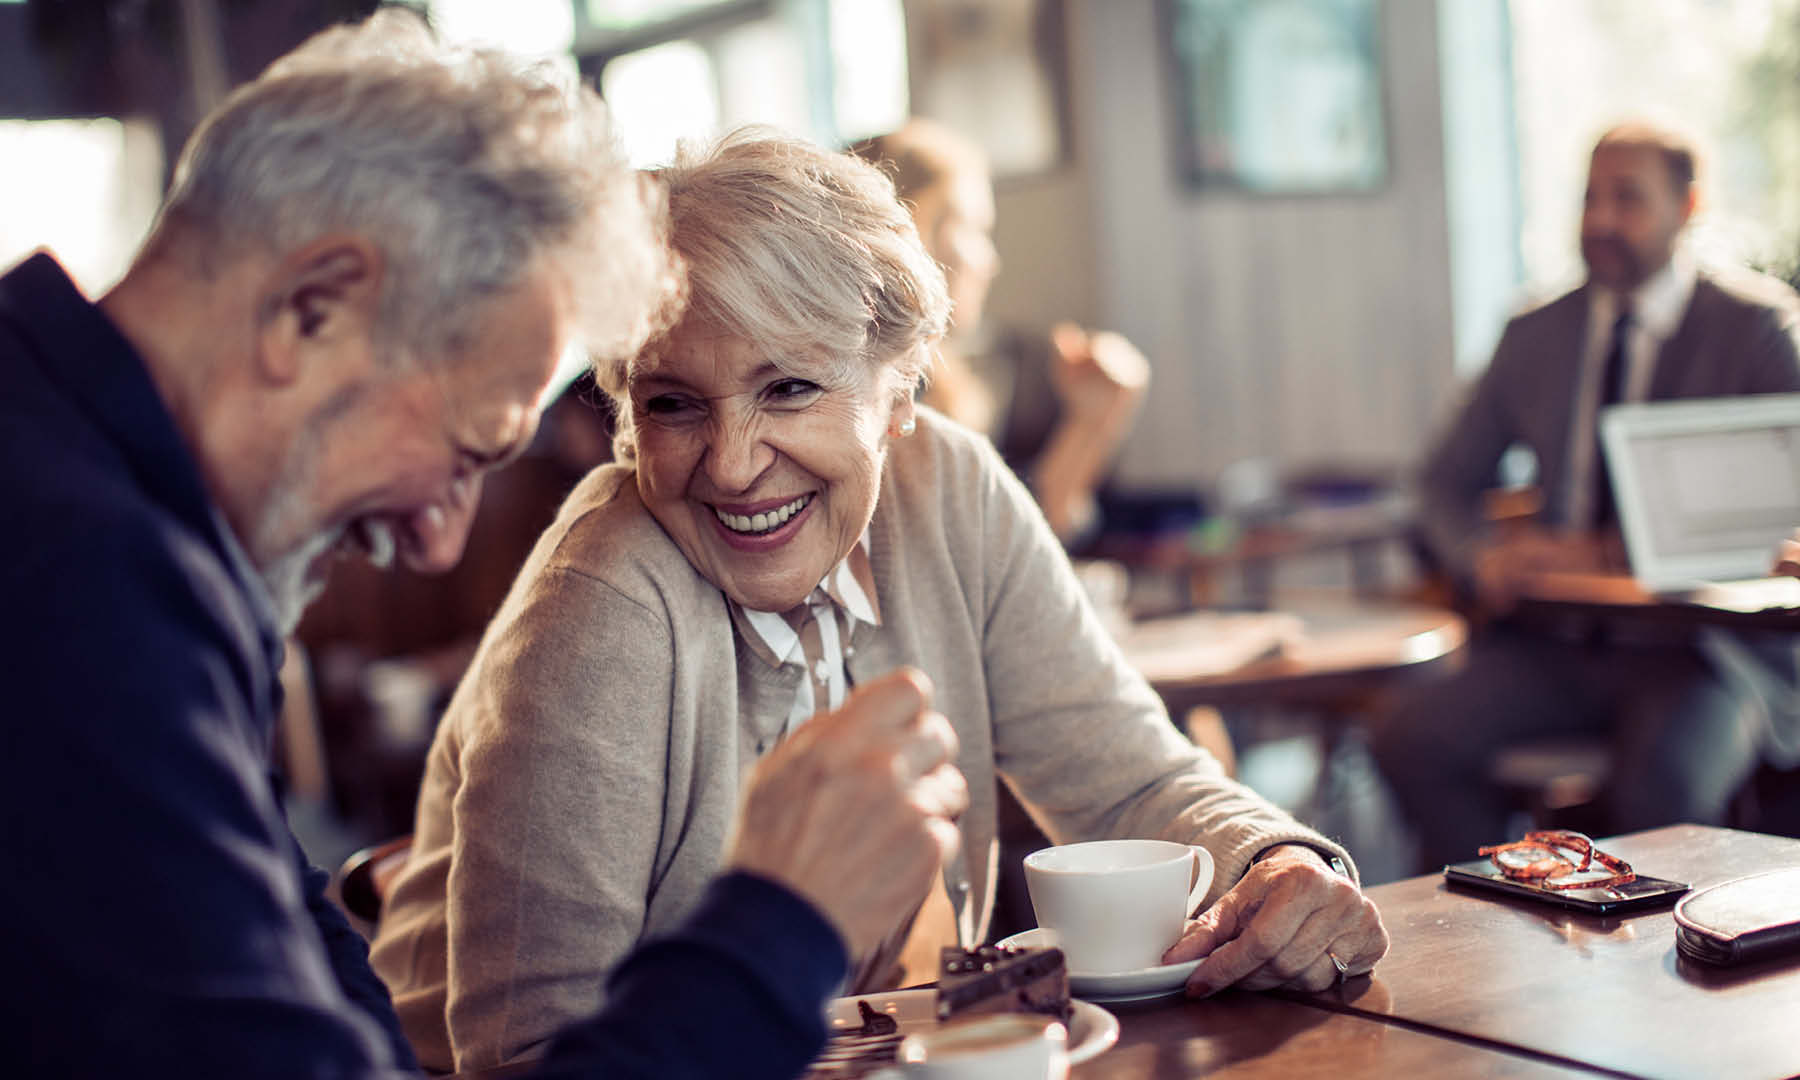 Senior couple laugh and smile sitting at coffee shop close up view with mugs and phone nearby and other coffee shop patrons in background